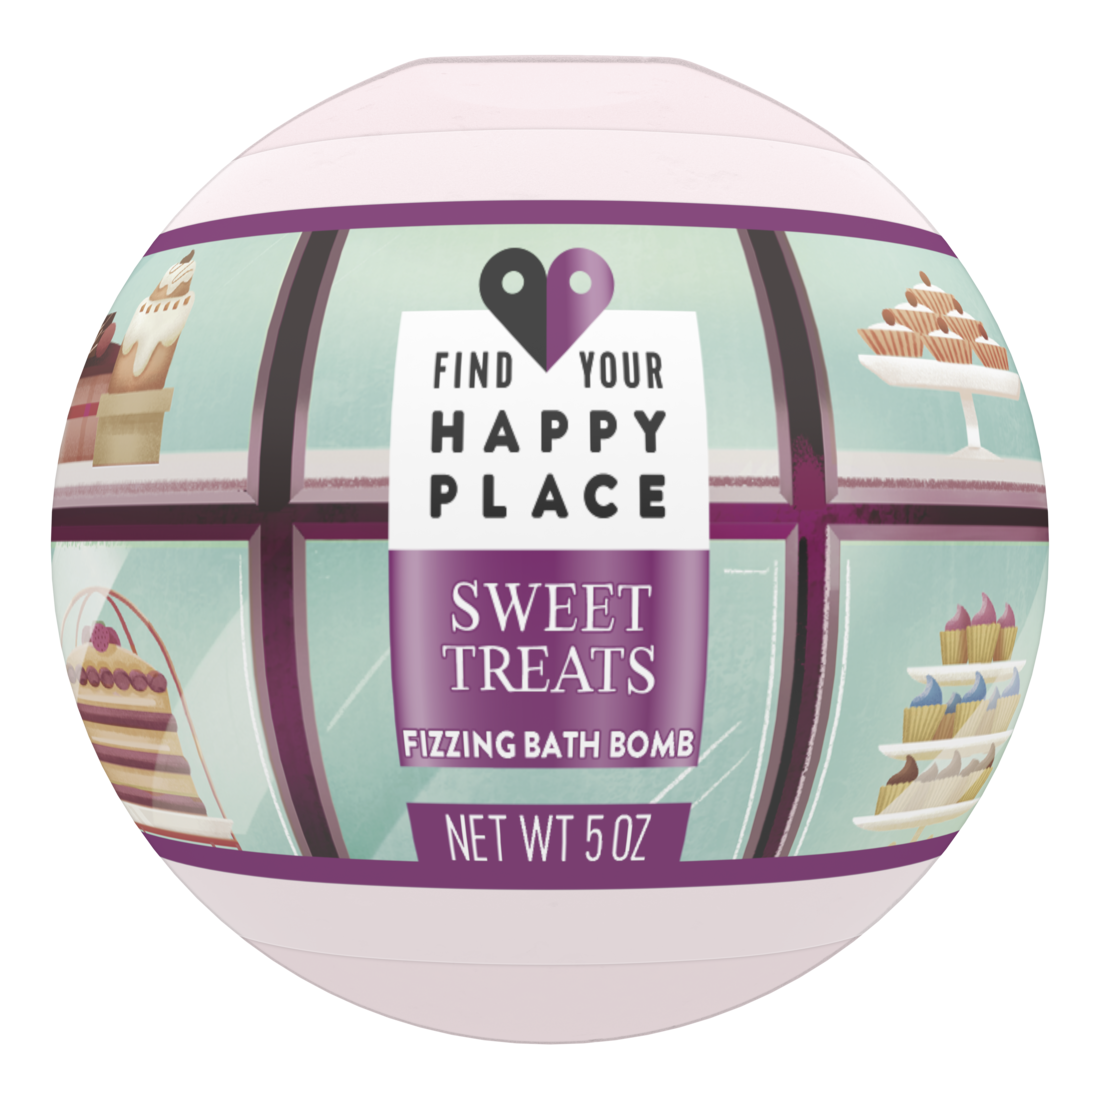 Find Your Happy Place Sweet Treats Fizzing Bath Bomb Brown Sugar